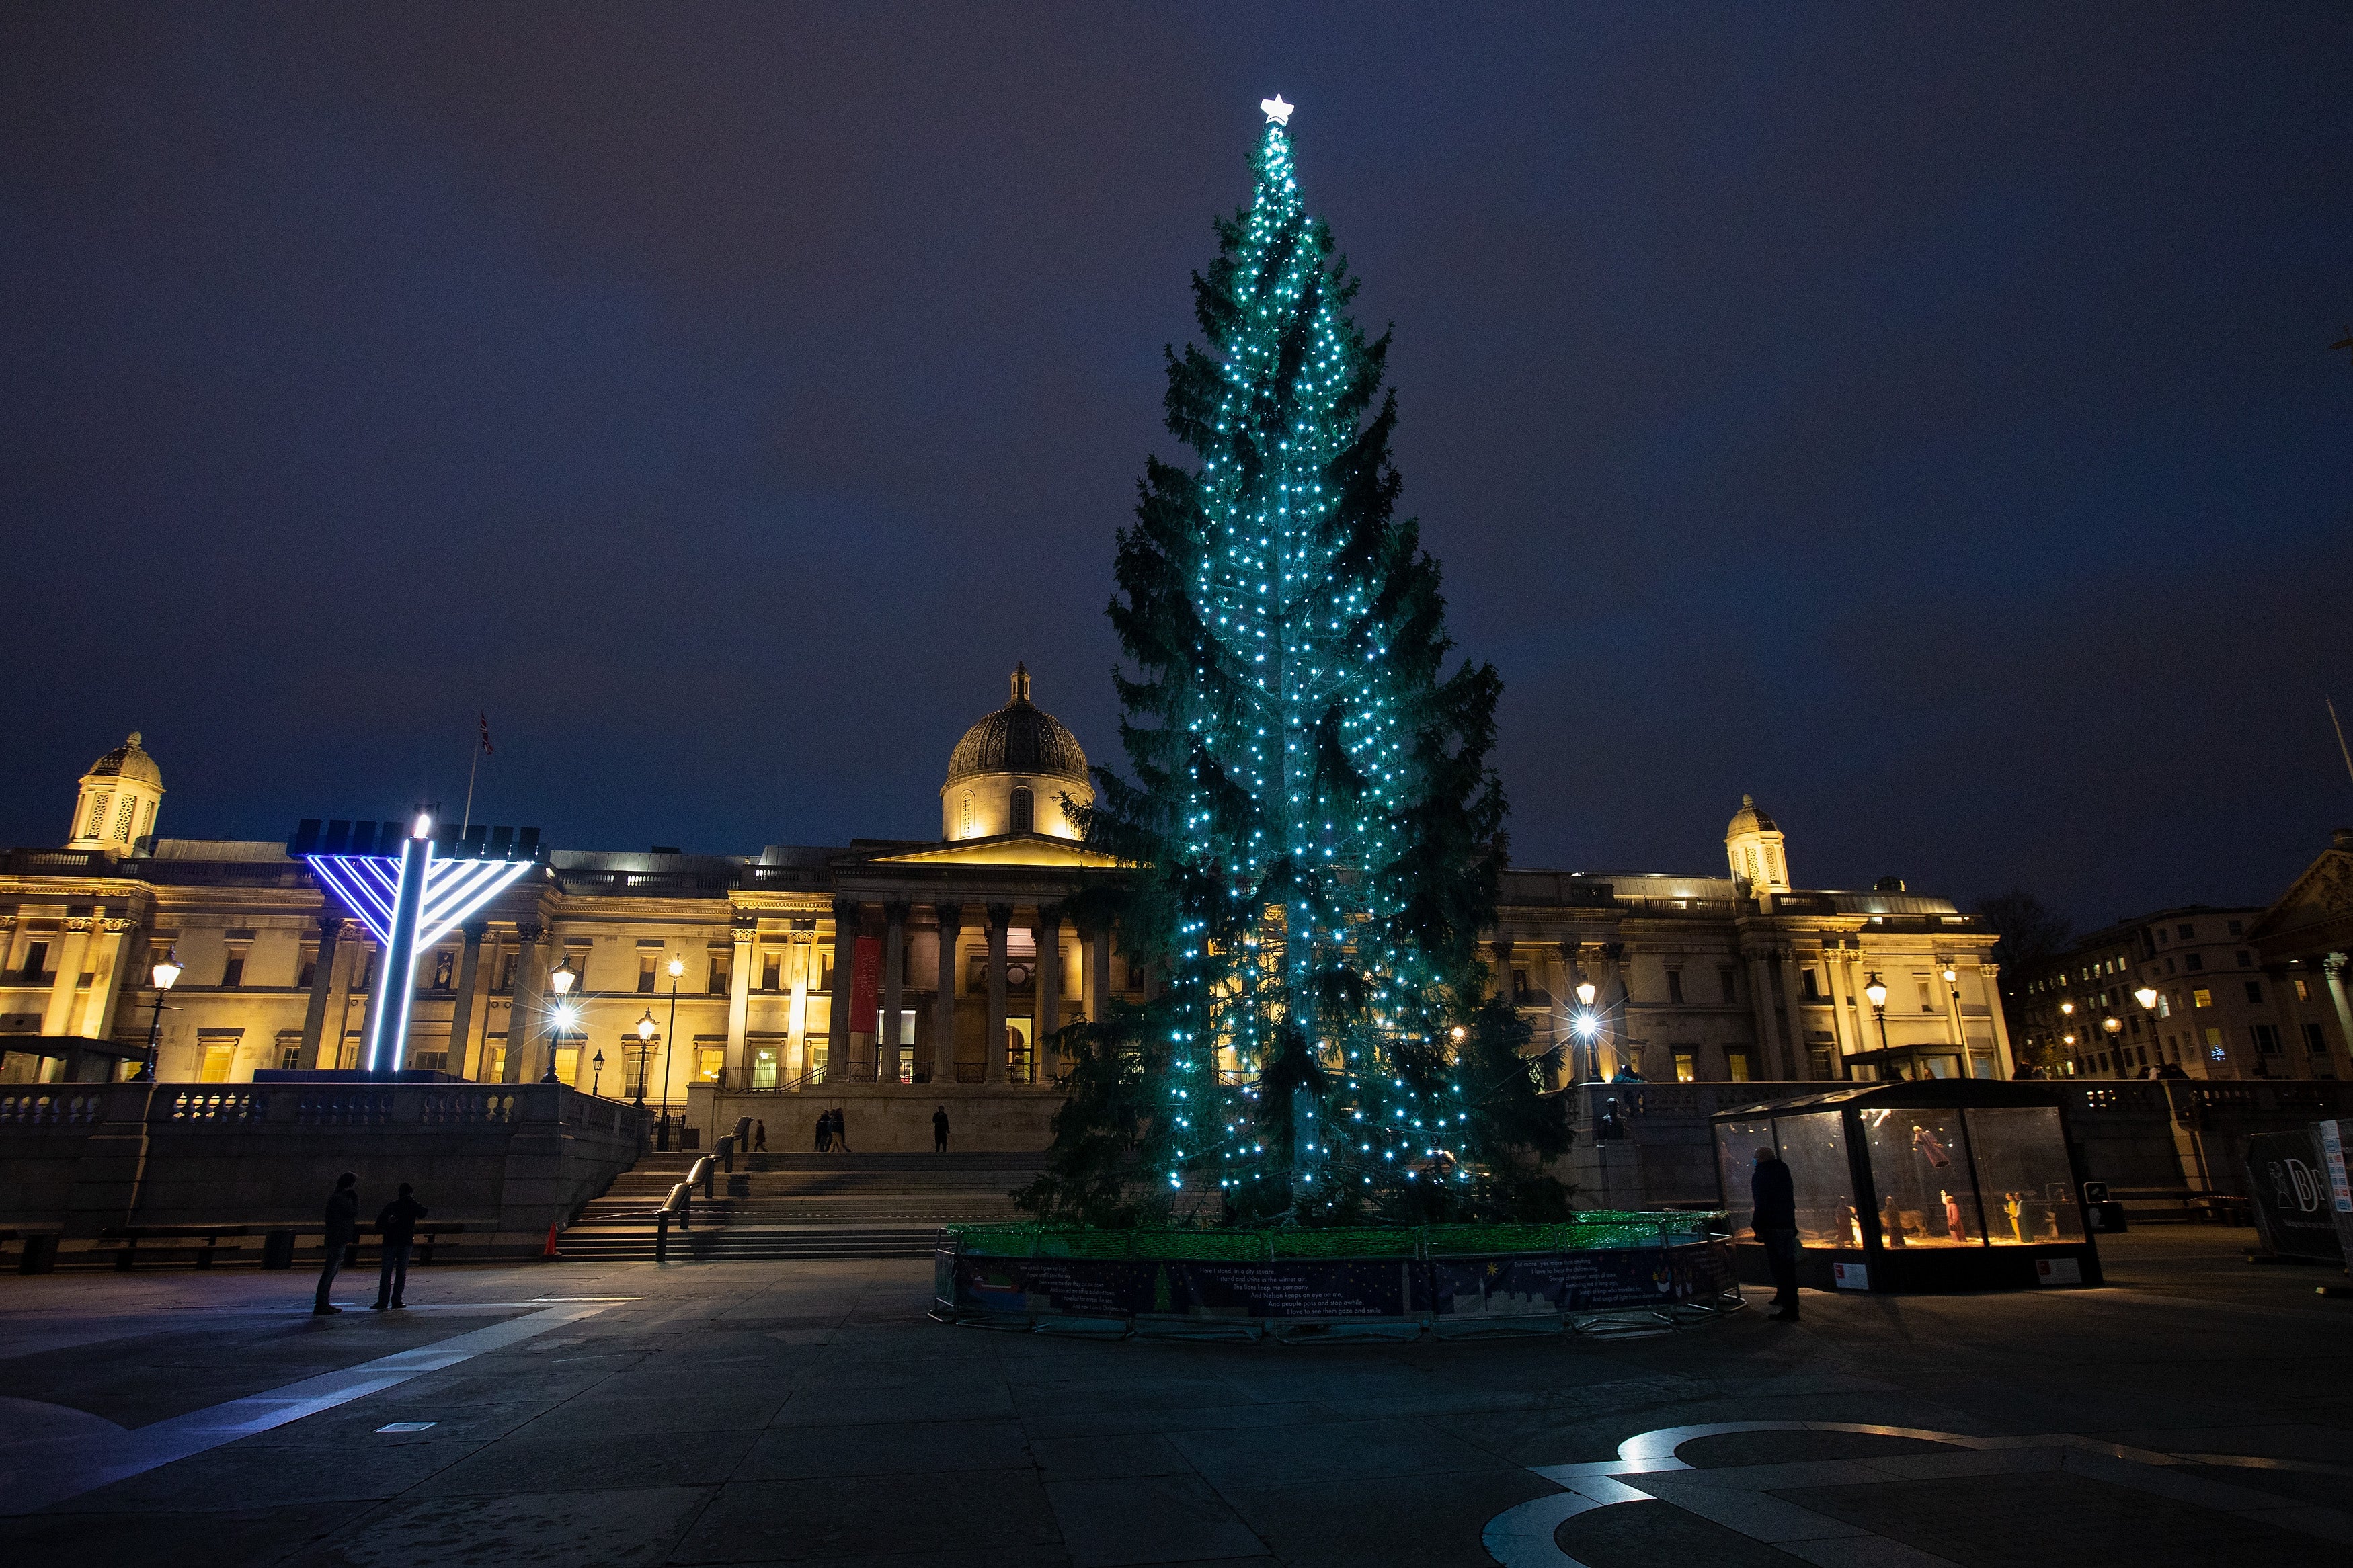 A festive view of the National Gallery in Trafalgar Square, London